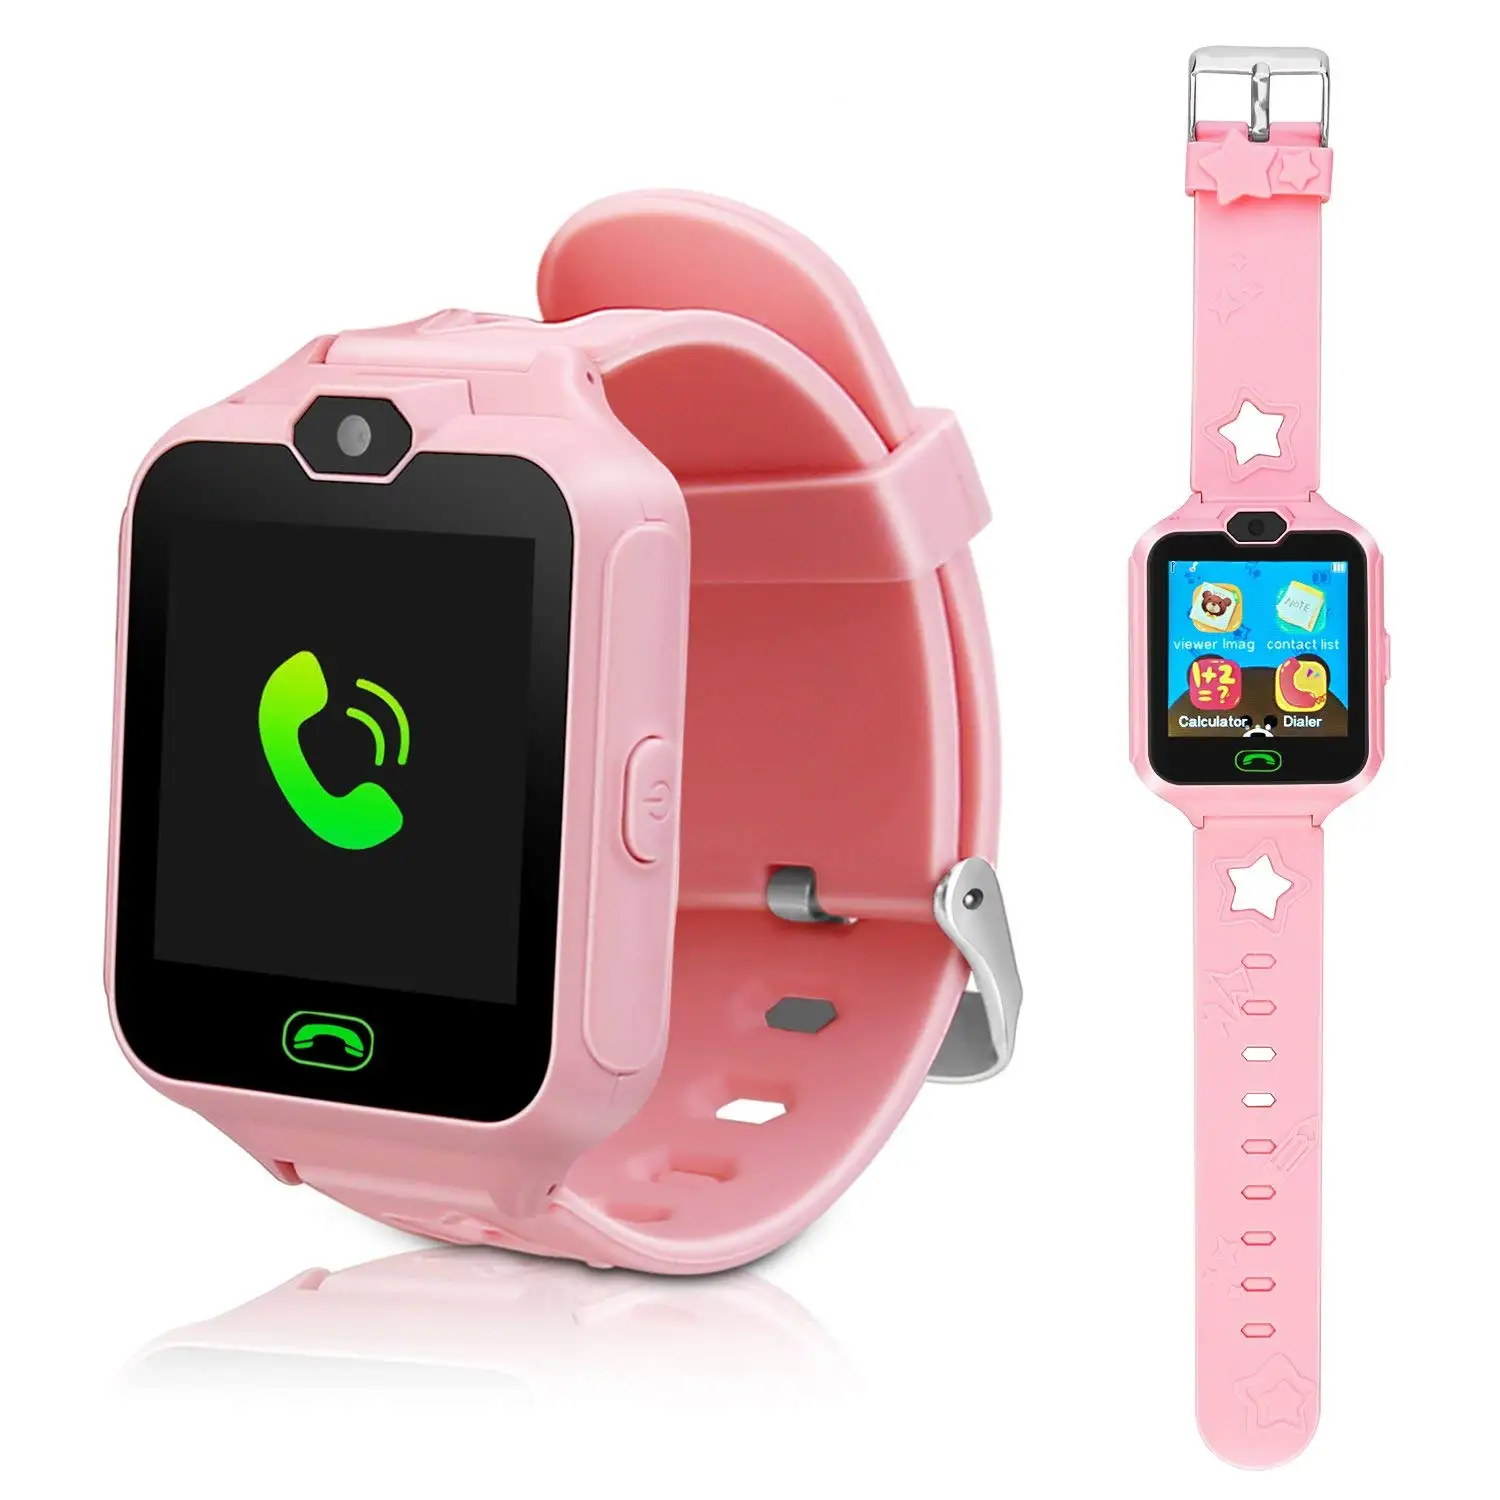 ladies watch screen touch